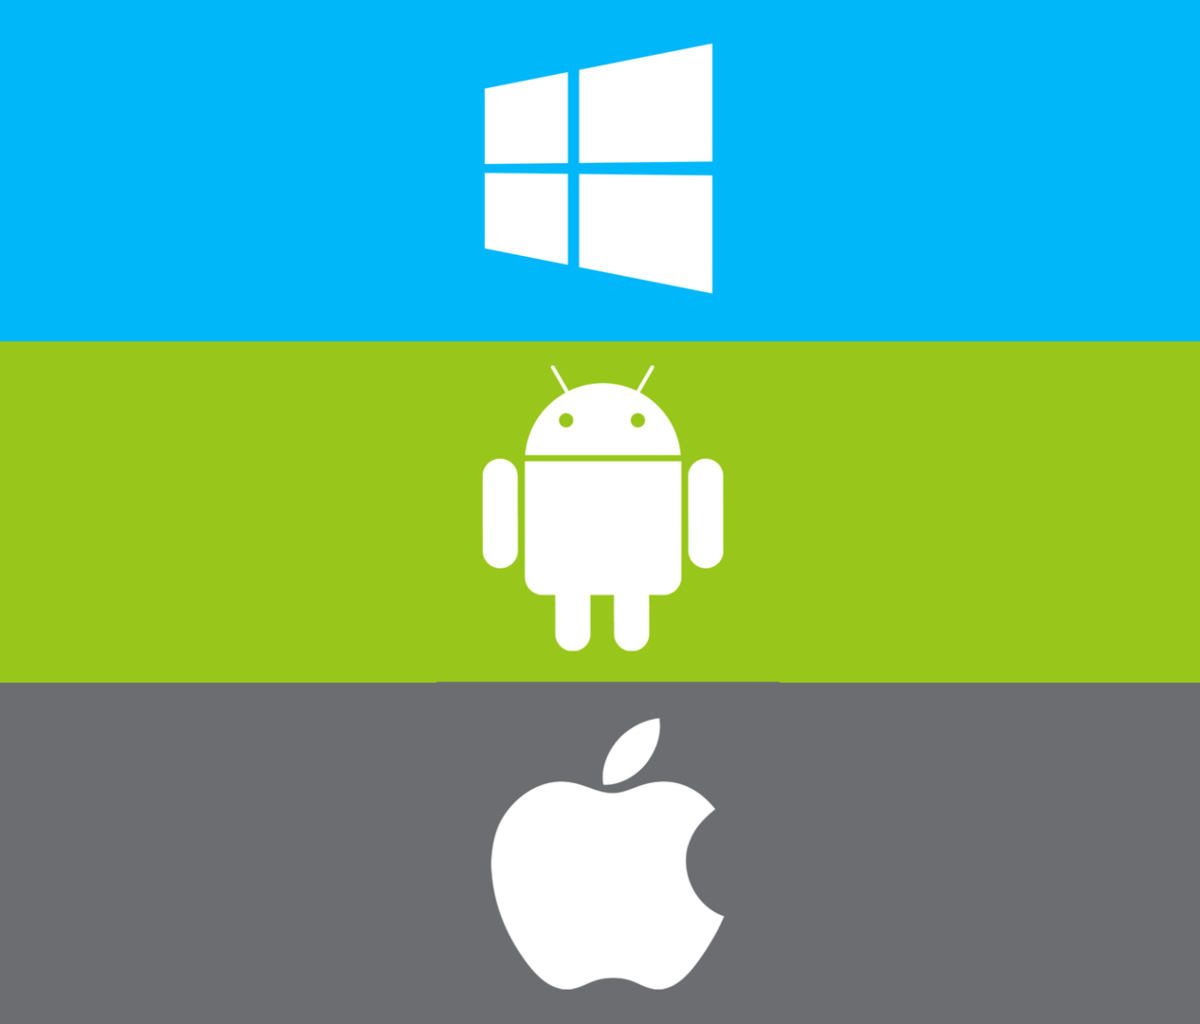 Windows, Apple, Android - What's Your Choice? wallpaper 1200x1024